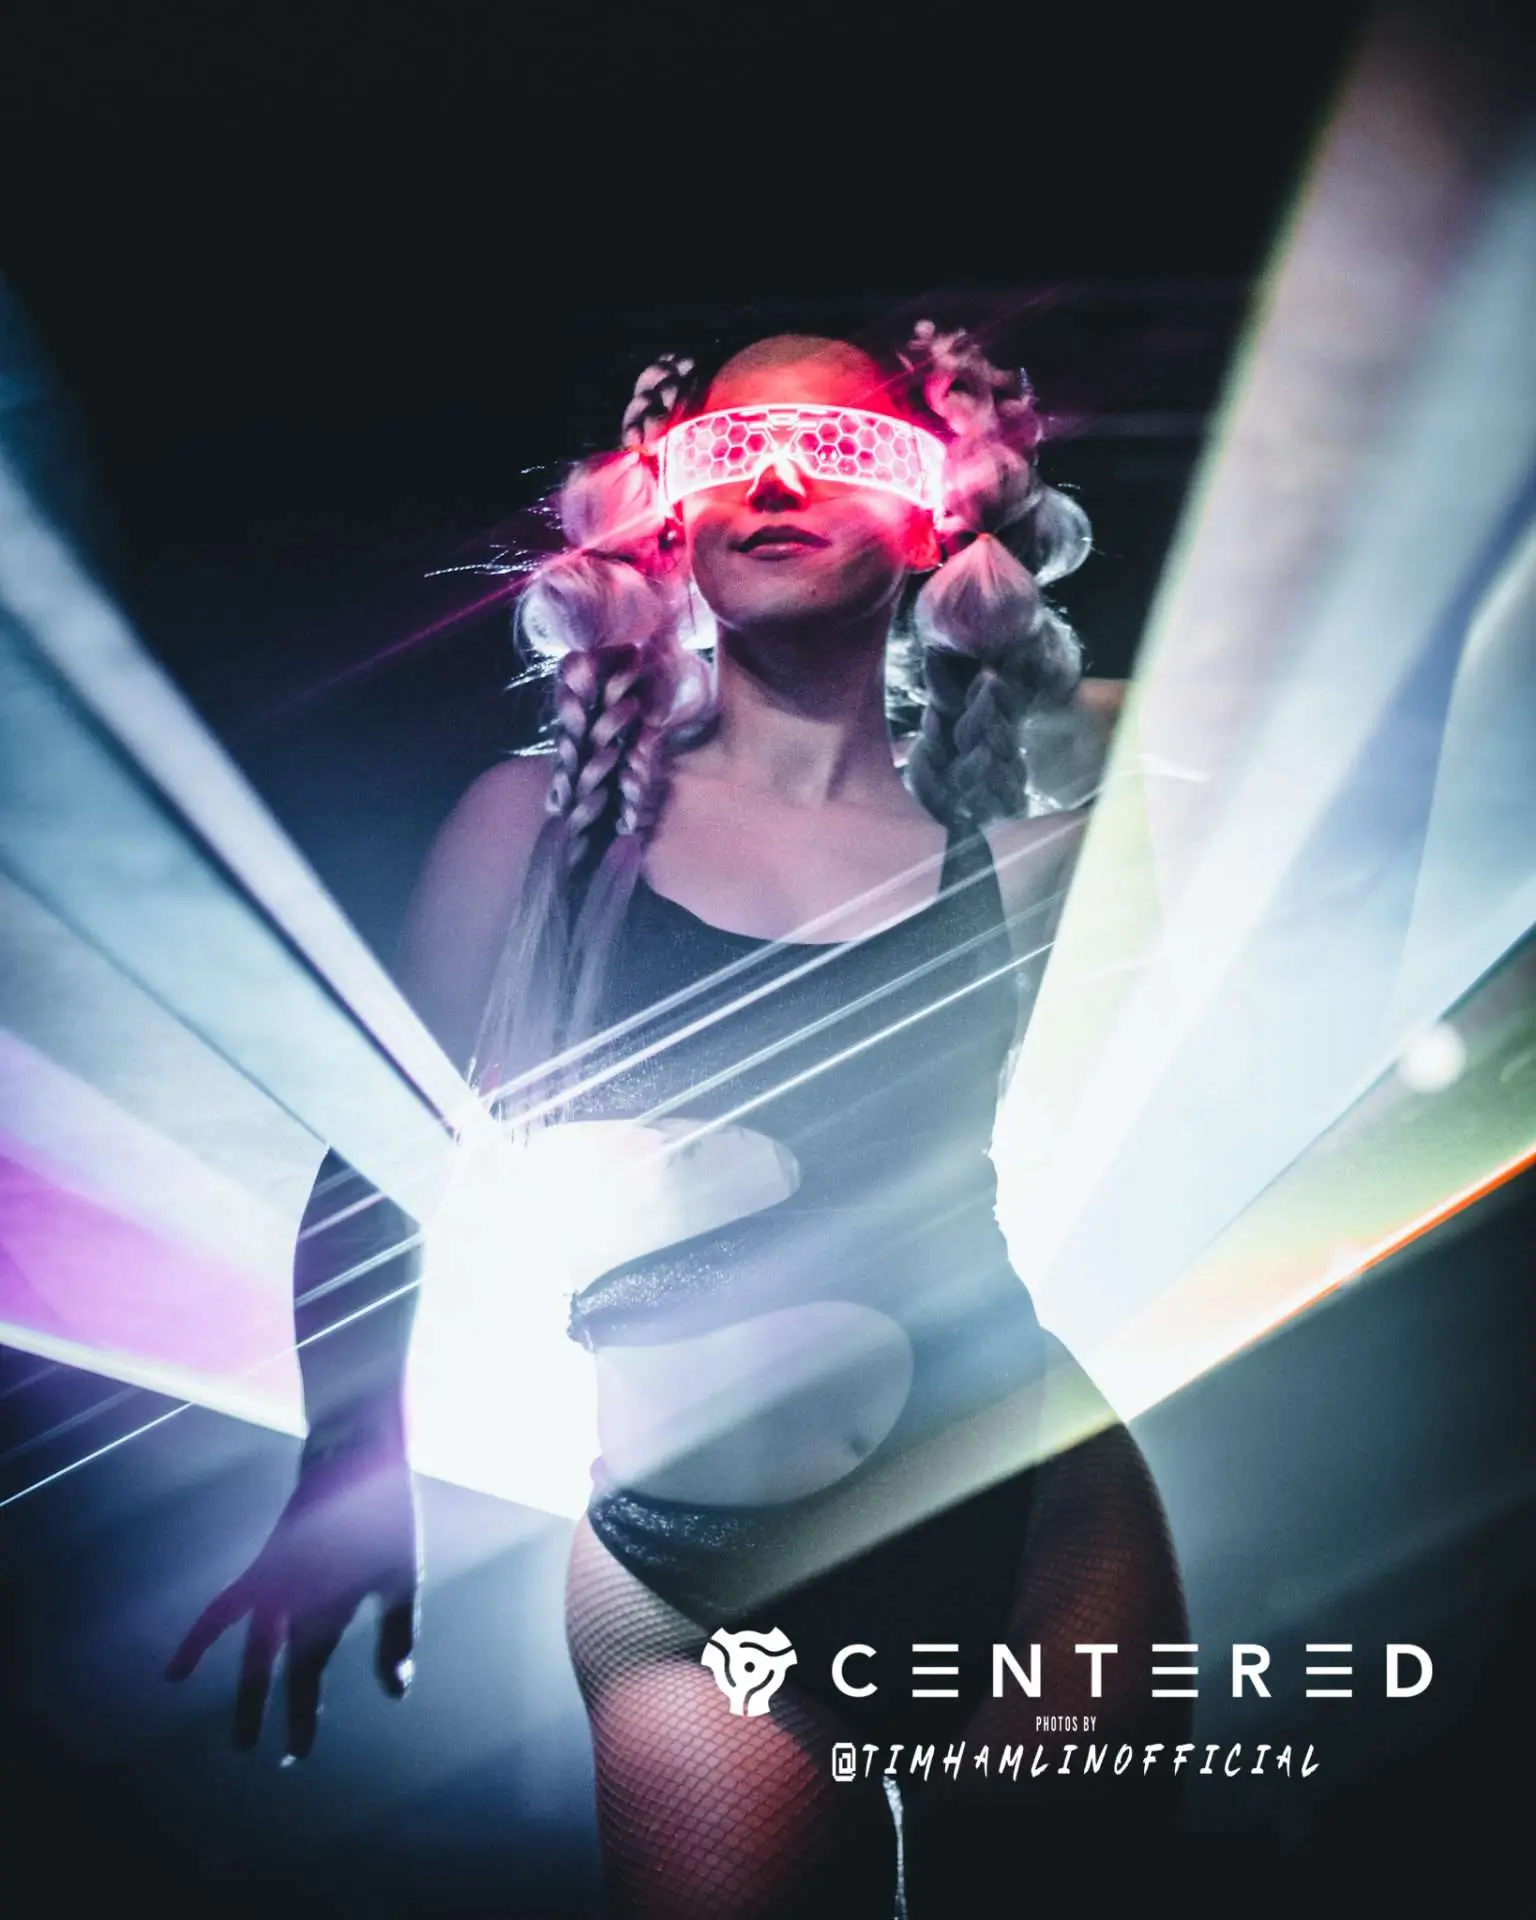 A young woman with blonde hair dances in a black leotard. She is illuminated by a bright colorful light from behind. She's wearing a bright neon lighted face sheild which gives her a robotic look.